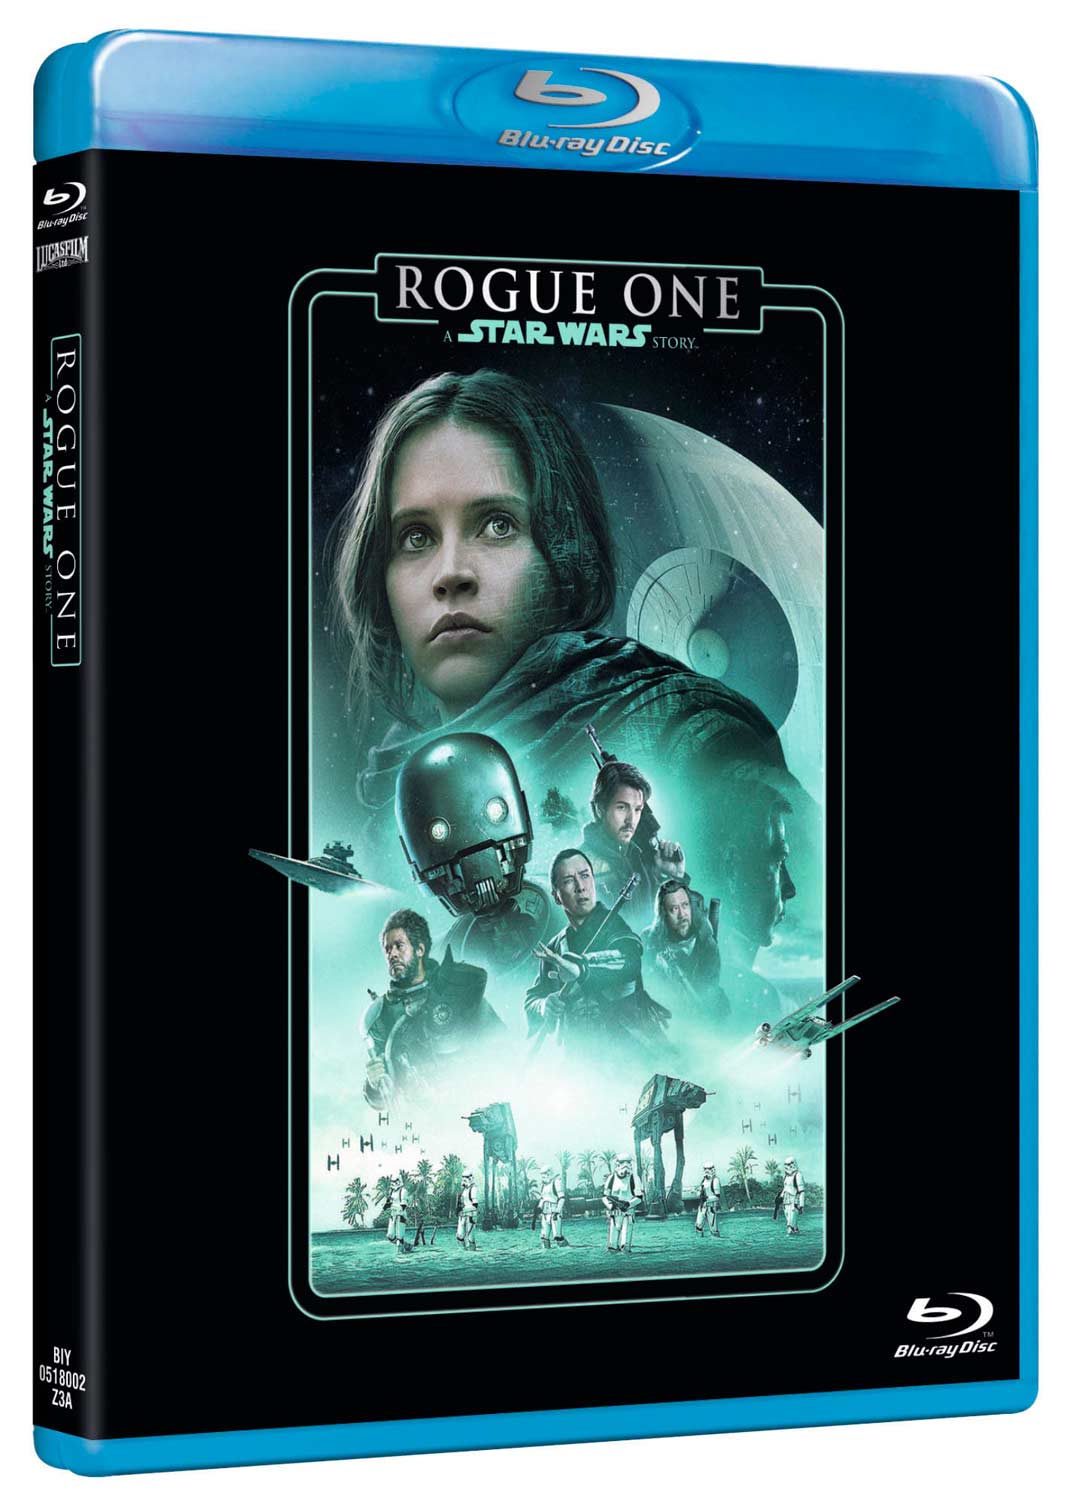 ROGUE ONE - A STAR WARS STORY REPKG